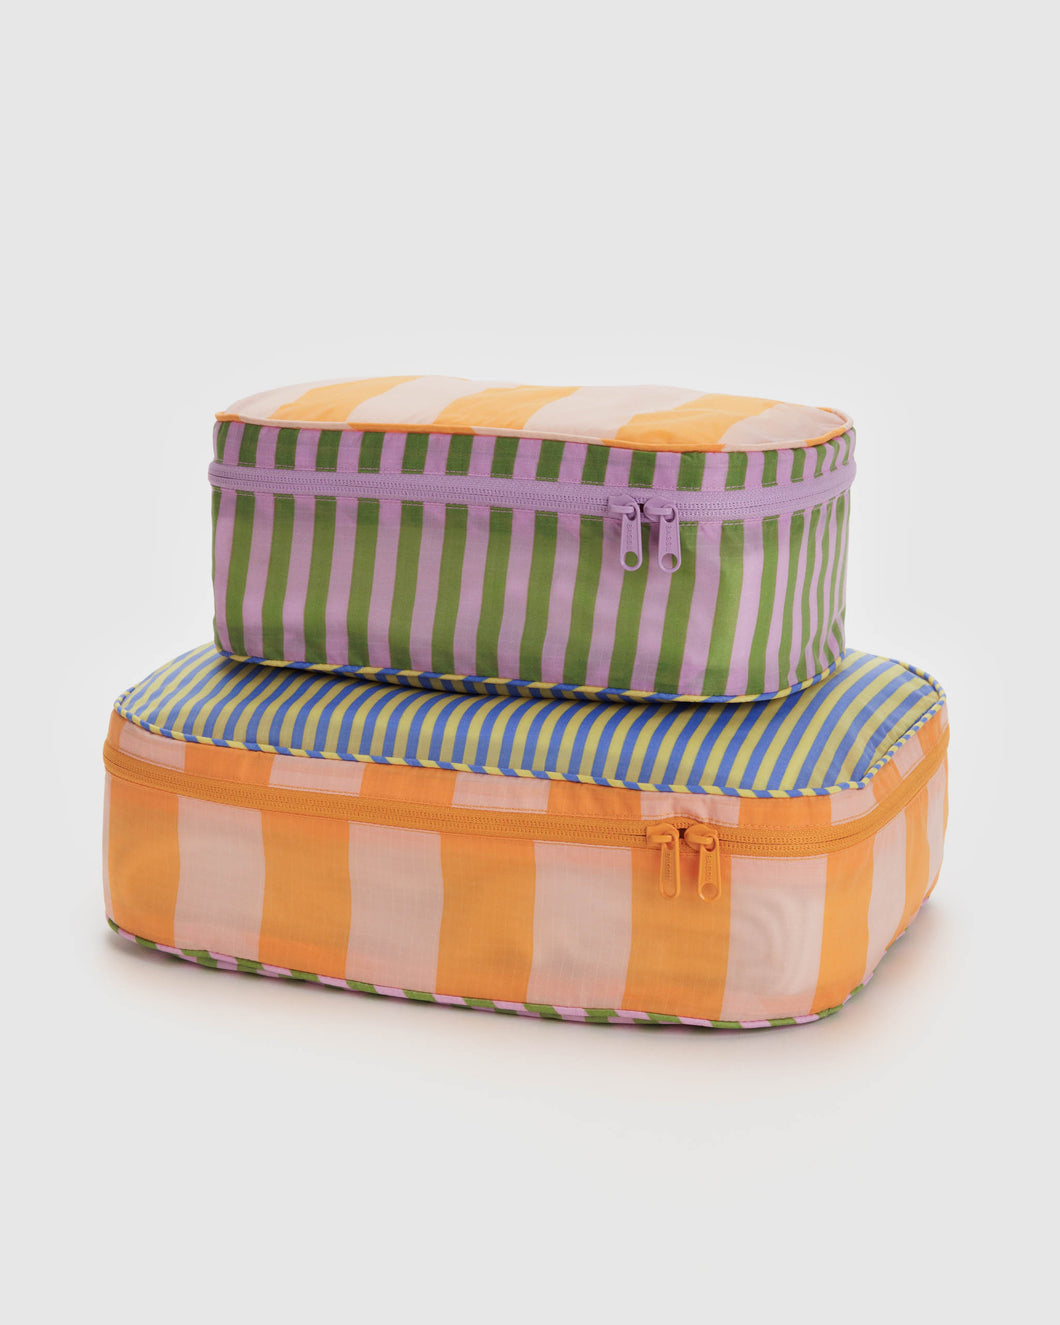 NEW! Packing Cube Set - Hotel Stripes